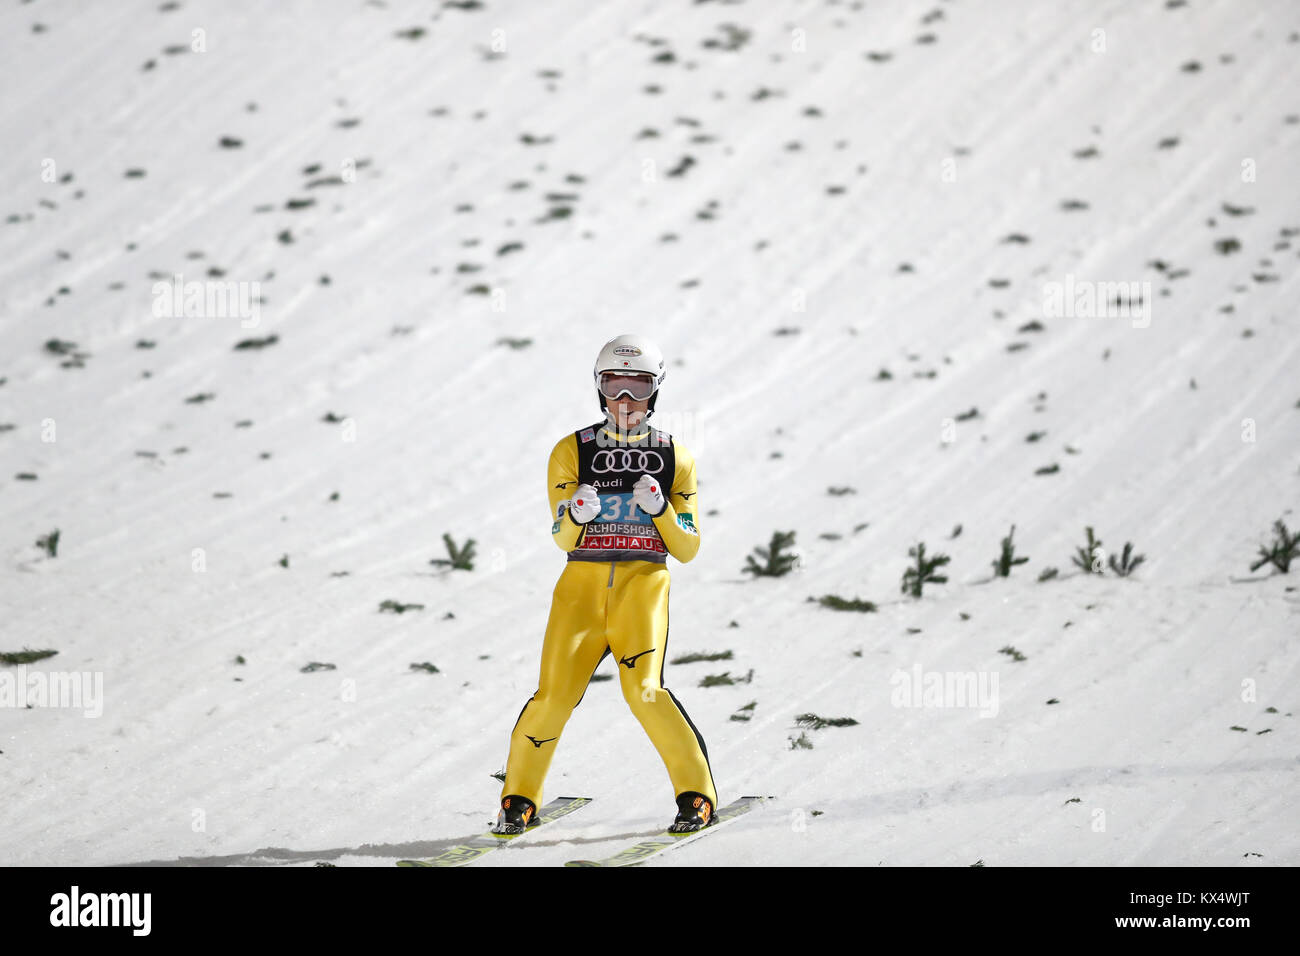 Bischofshofen, Austria. 6th Jan, 2018. Junshiro Kobayashi of Japan reacts after his jump in the second round at the 66th Four Hills Tournament in Bischofshofen, Austria, 6 January 2018. - NO WIRE SERVICE - Credit: Matthias Schrader/AP/dpa/Alamy Live News Stock Photo